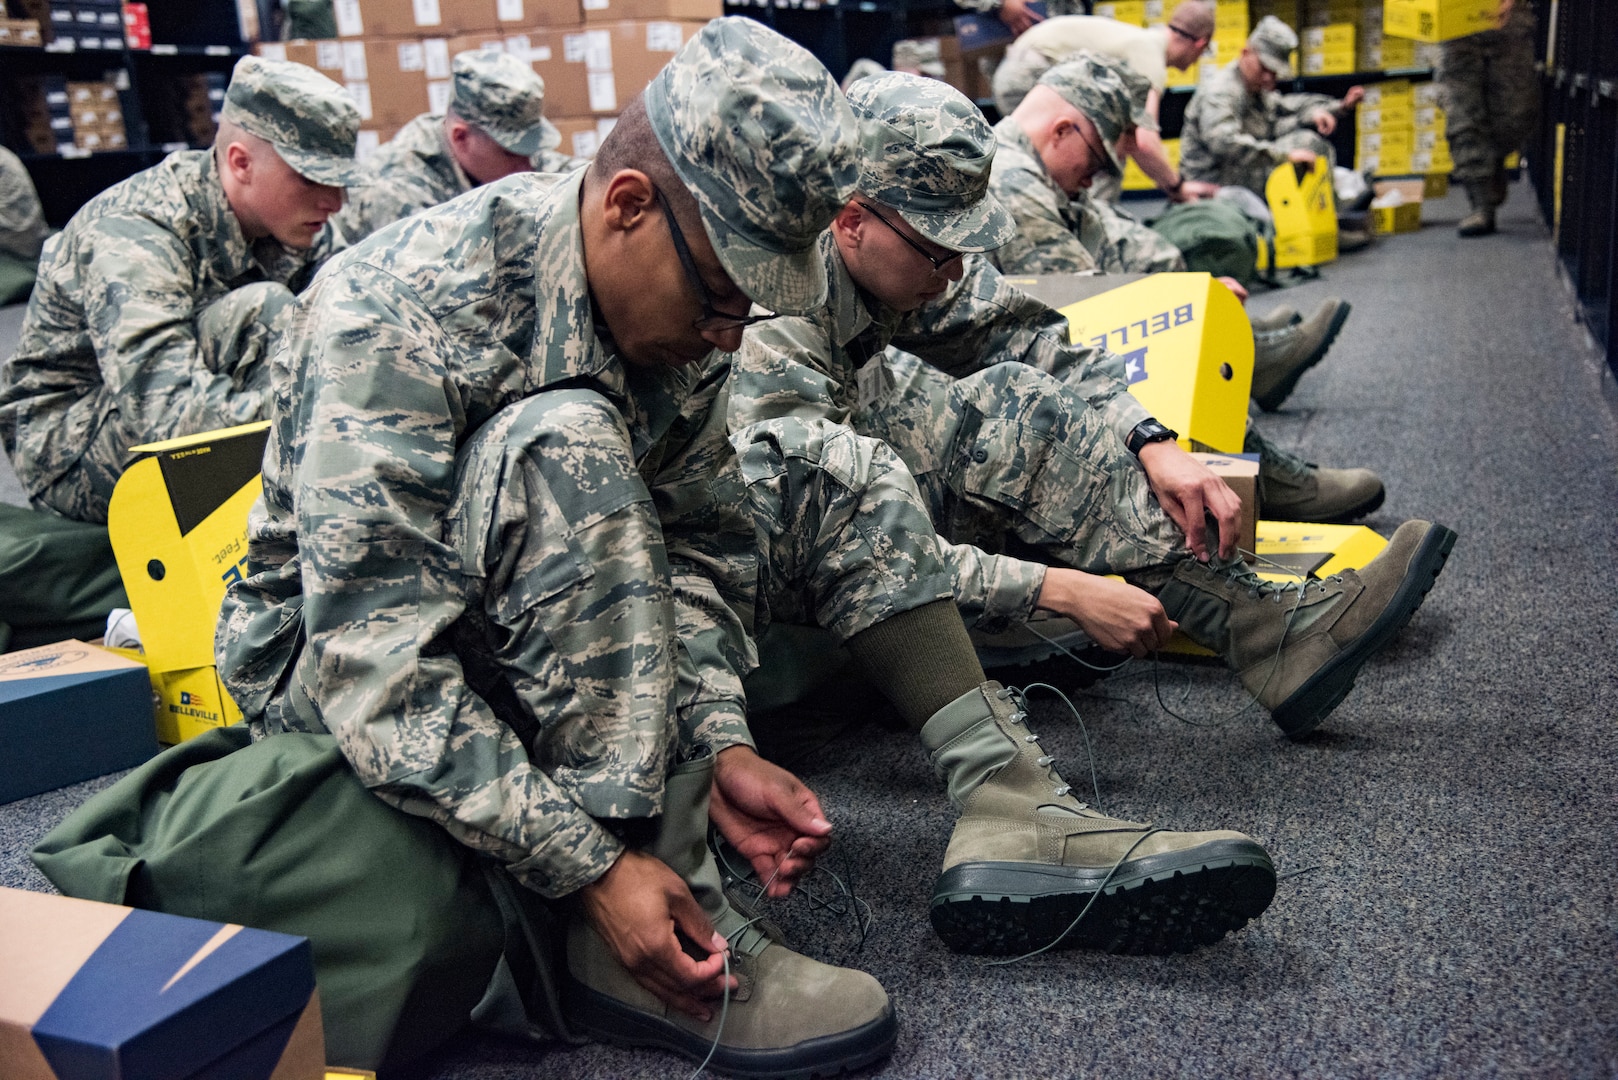 Trainees try on boots during initial clothing issue May 1, 2019, at Joint Base San Antonio-Lackland, Texas. Between 300 and 400 trainees receive their first sets of uniforms weekly from initial clothing issue. (U.S. Air Force photo by Senior Airman Stormy Archer)